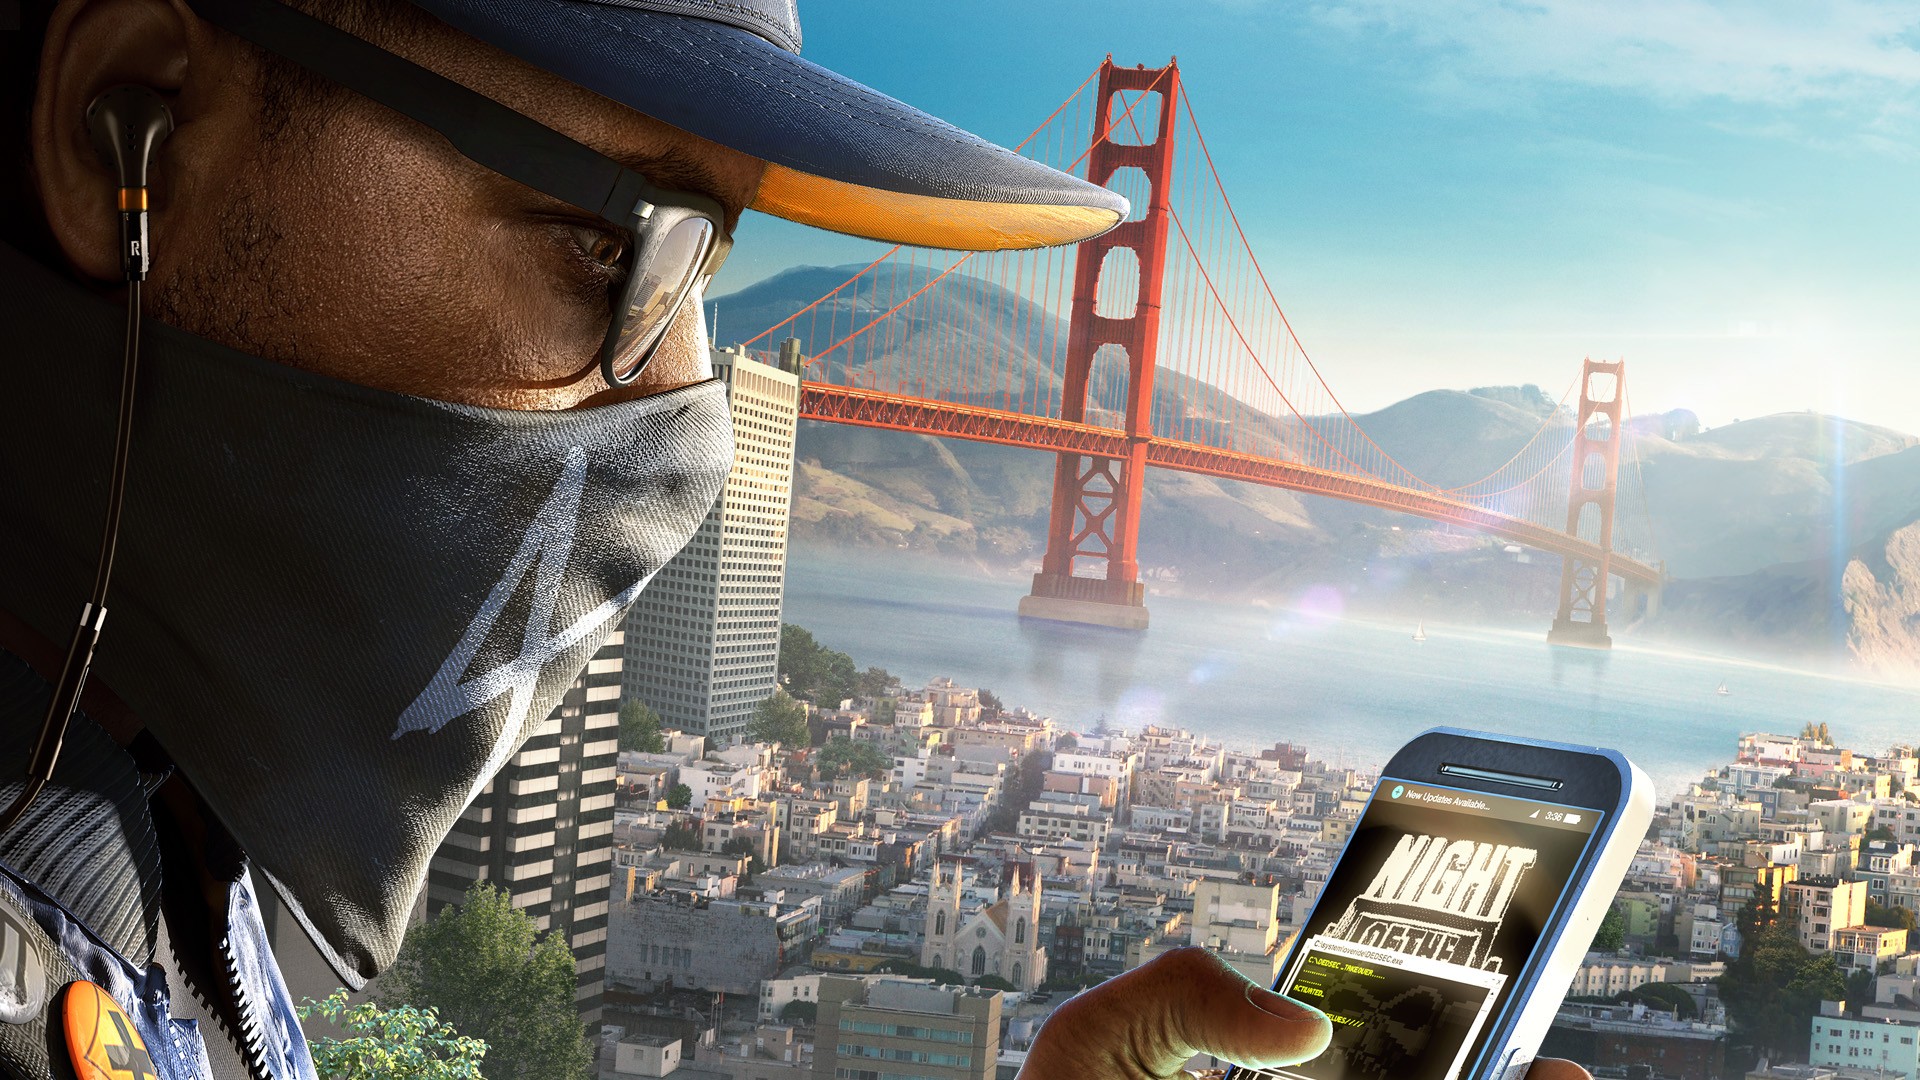 Upcoming Games Watch Dogs 2 Hackers Hacking 1920x1080